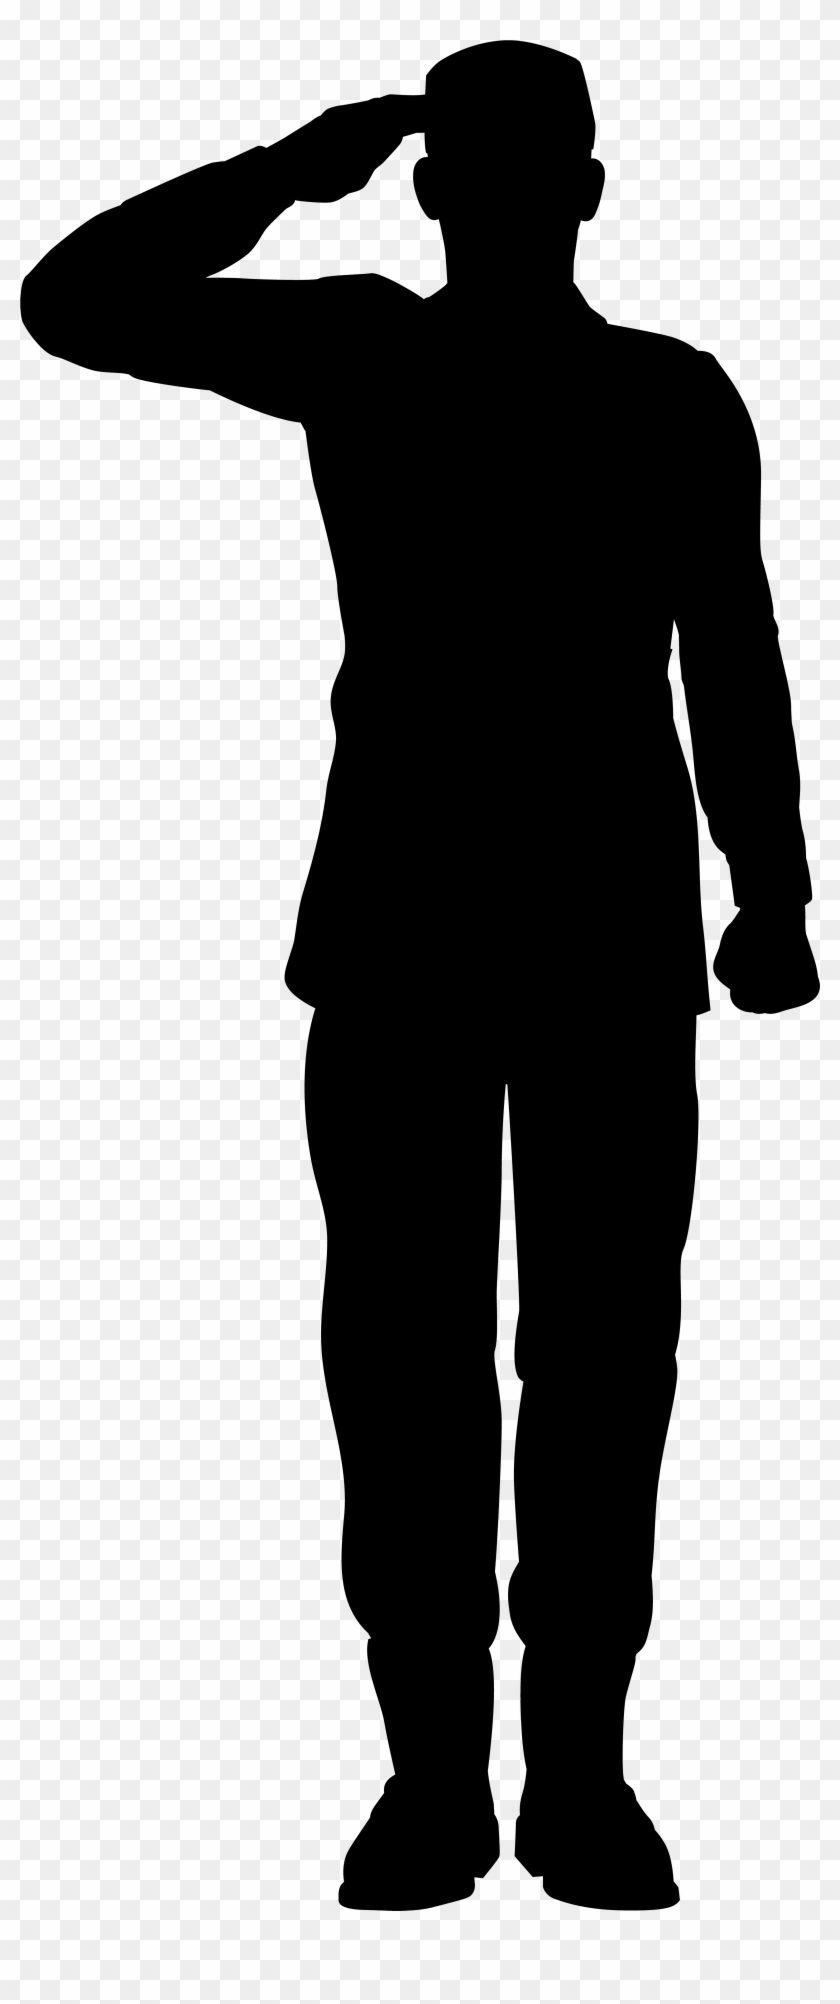 0, - Soldier Silhouette Png #247944